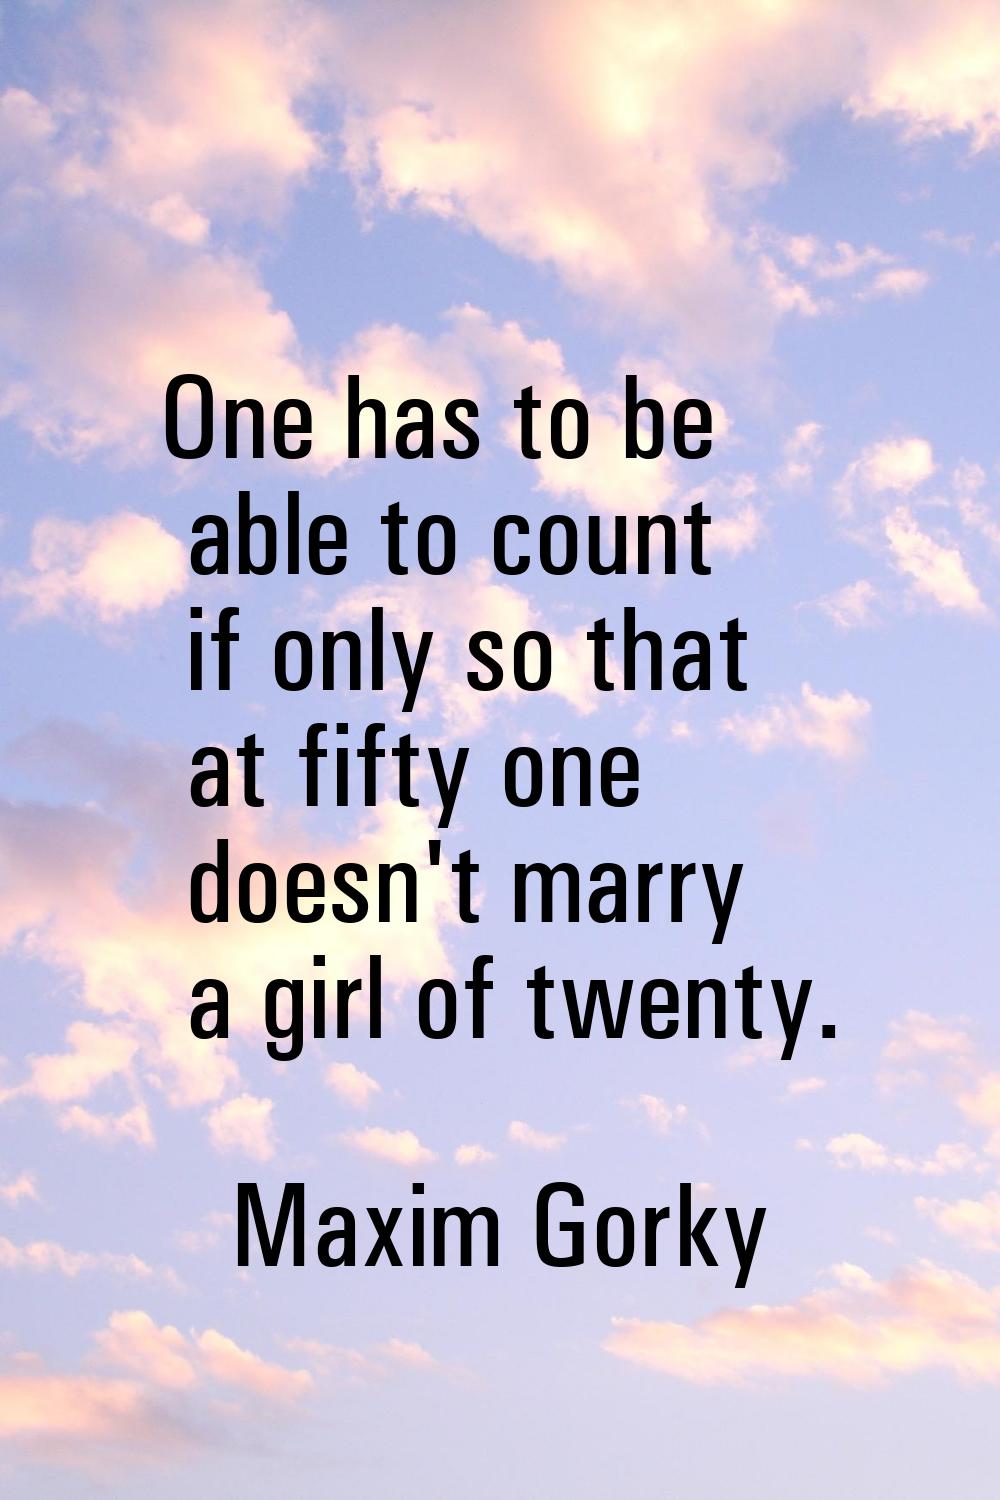 One has to be able to count if only so that at fifty one doesn't marry a girl of twenty.